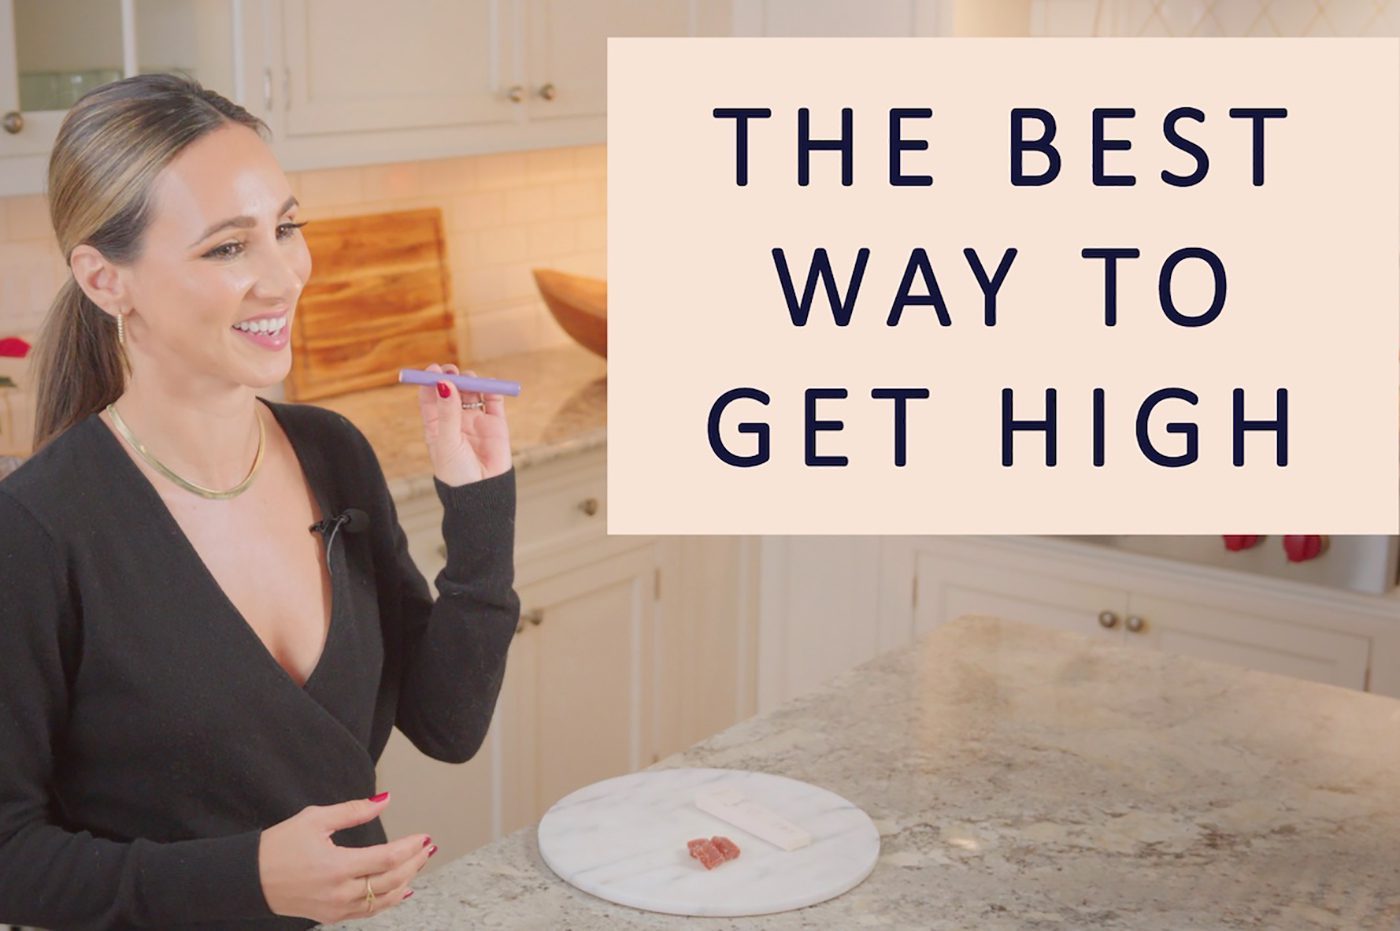 Are you wondering about the best way to get high for you? This guide will help you decide.